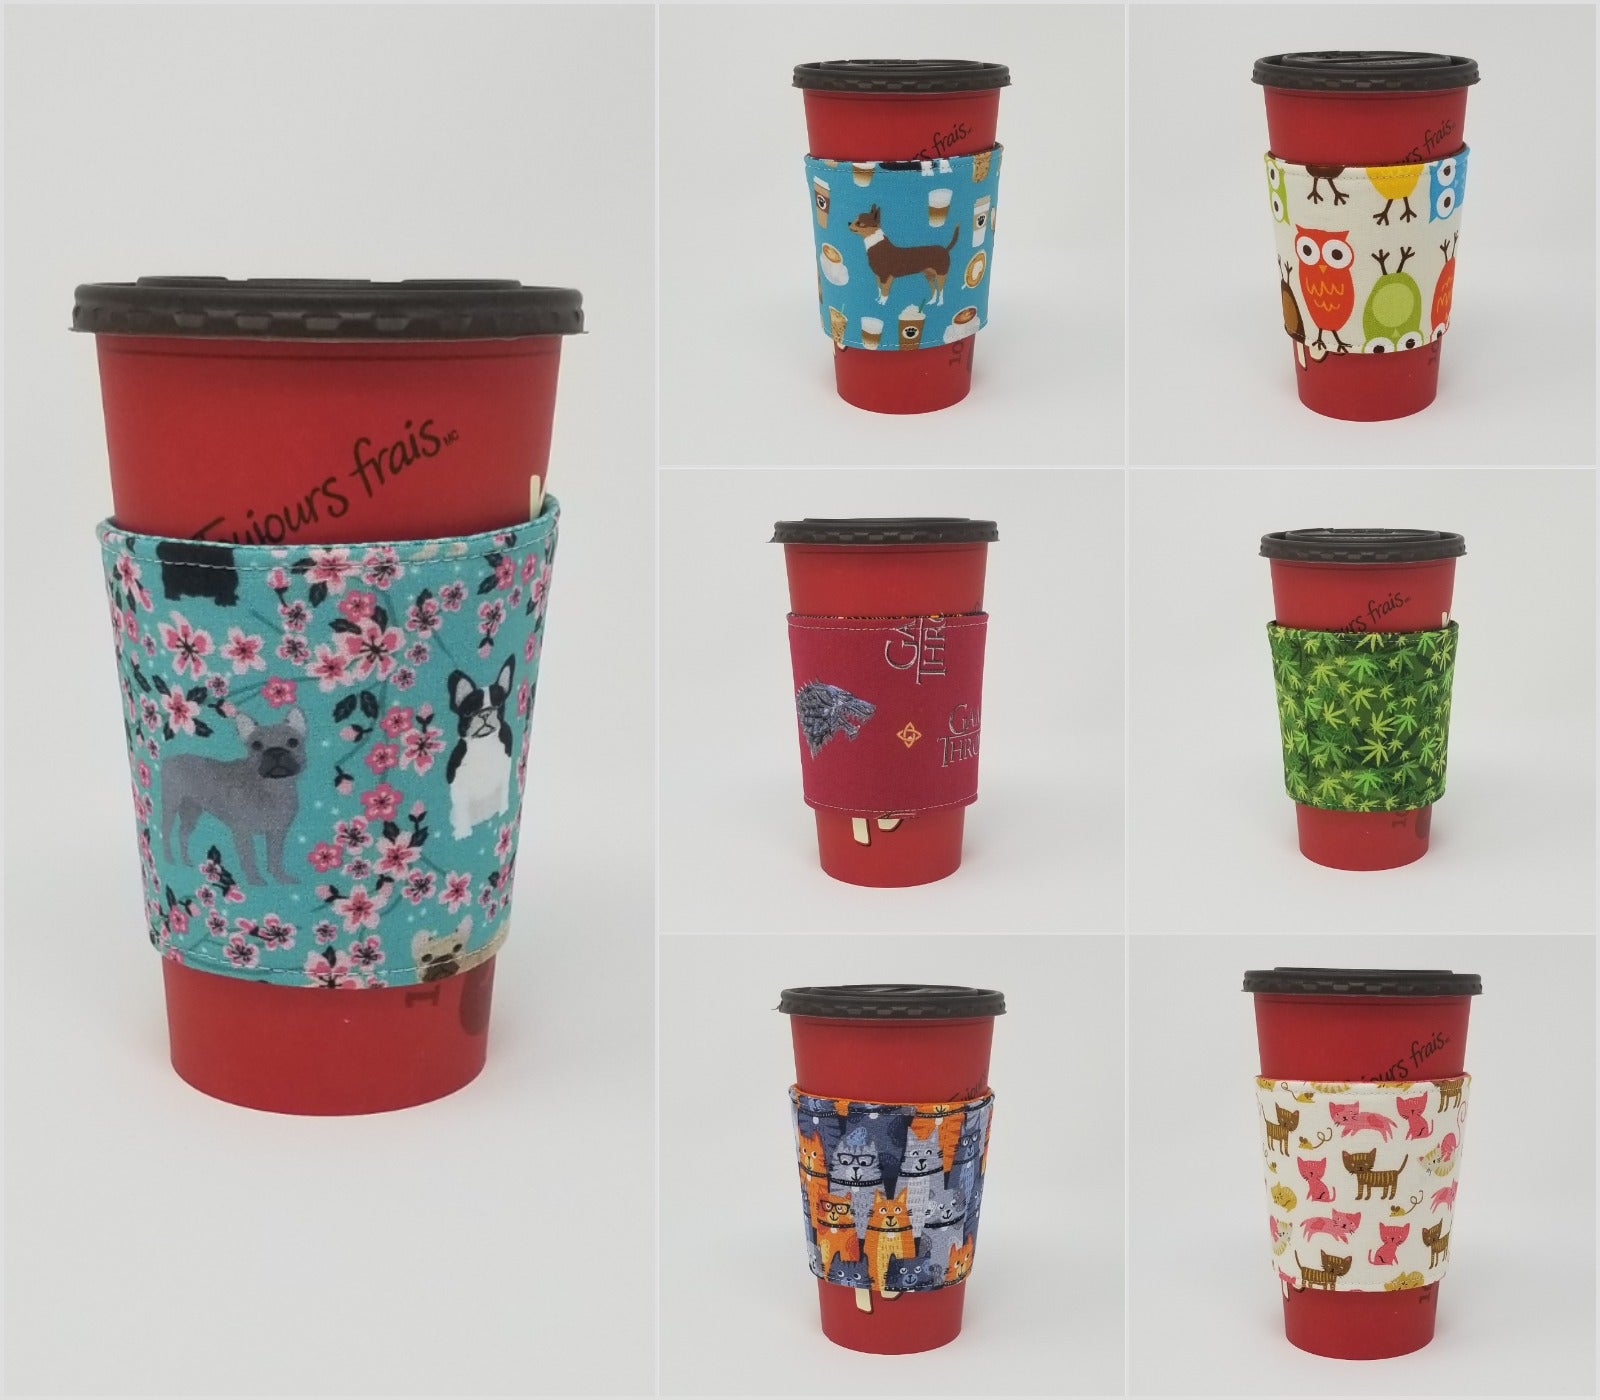 February 2019 New Reusable Cup Cozy styles